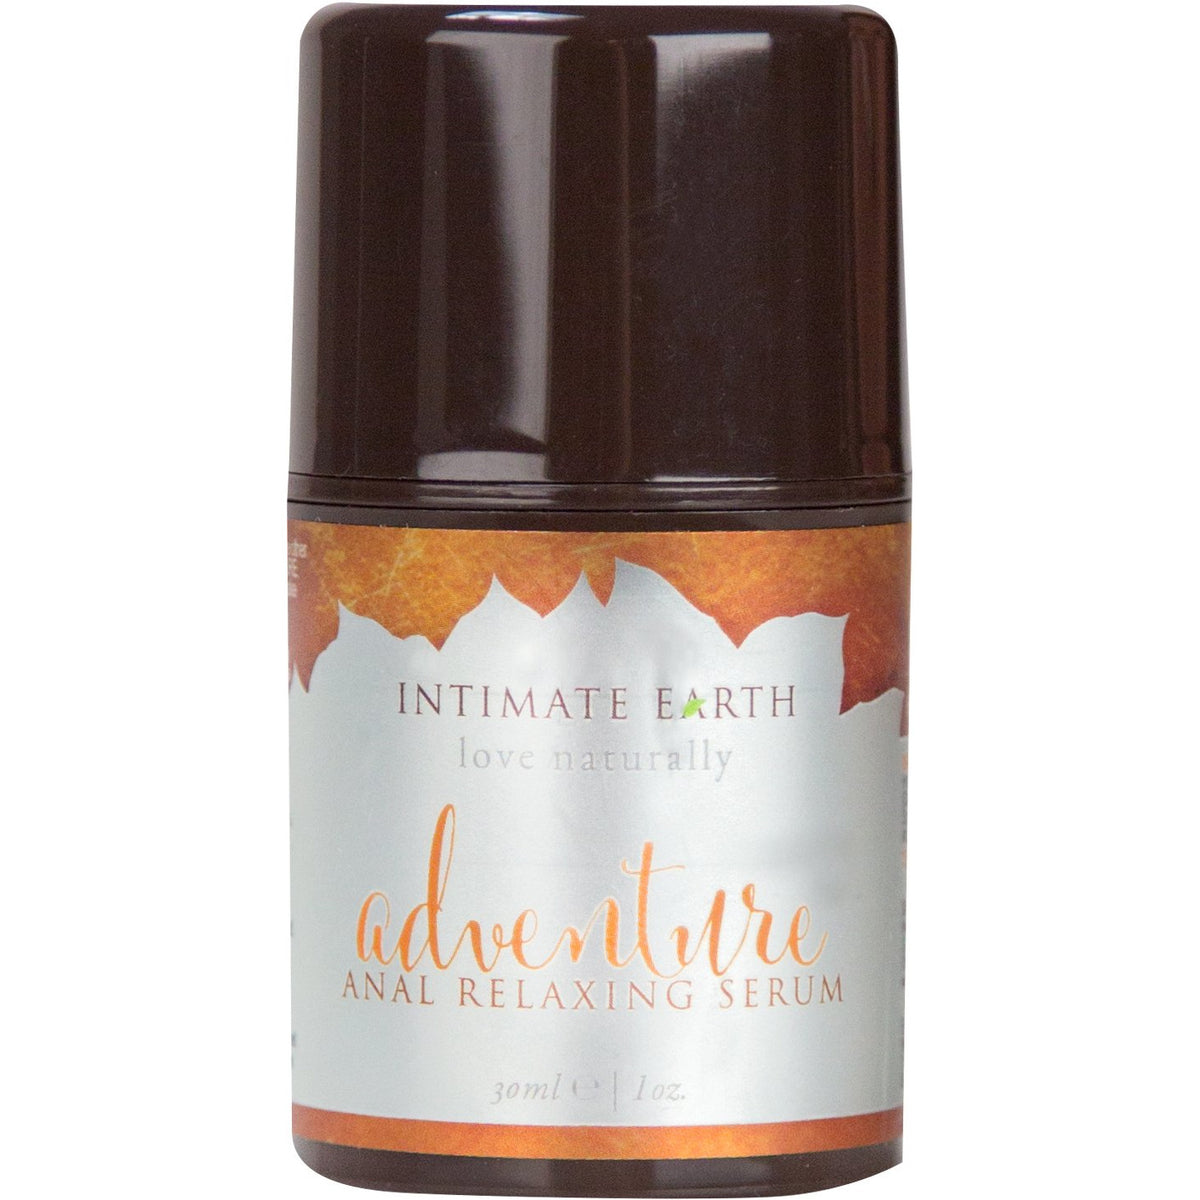 Intimate Earth Anal Relaxing Serum for Women - 30ml/1oz